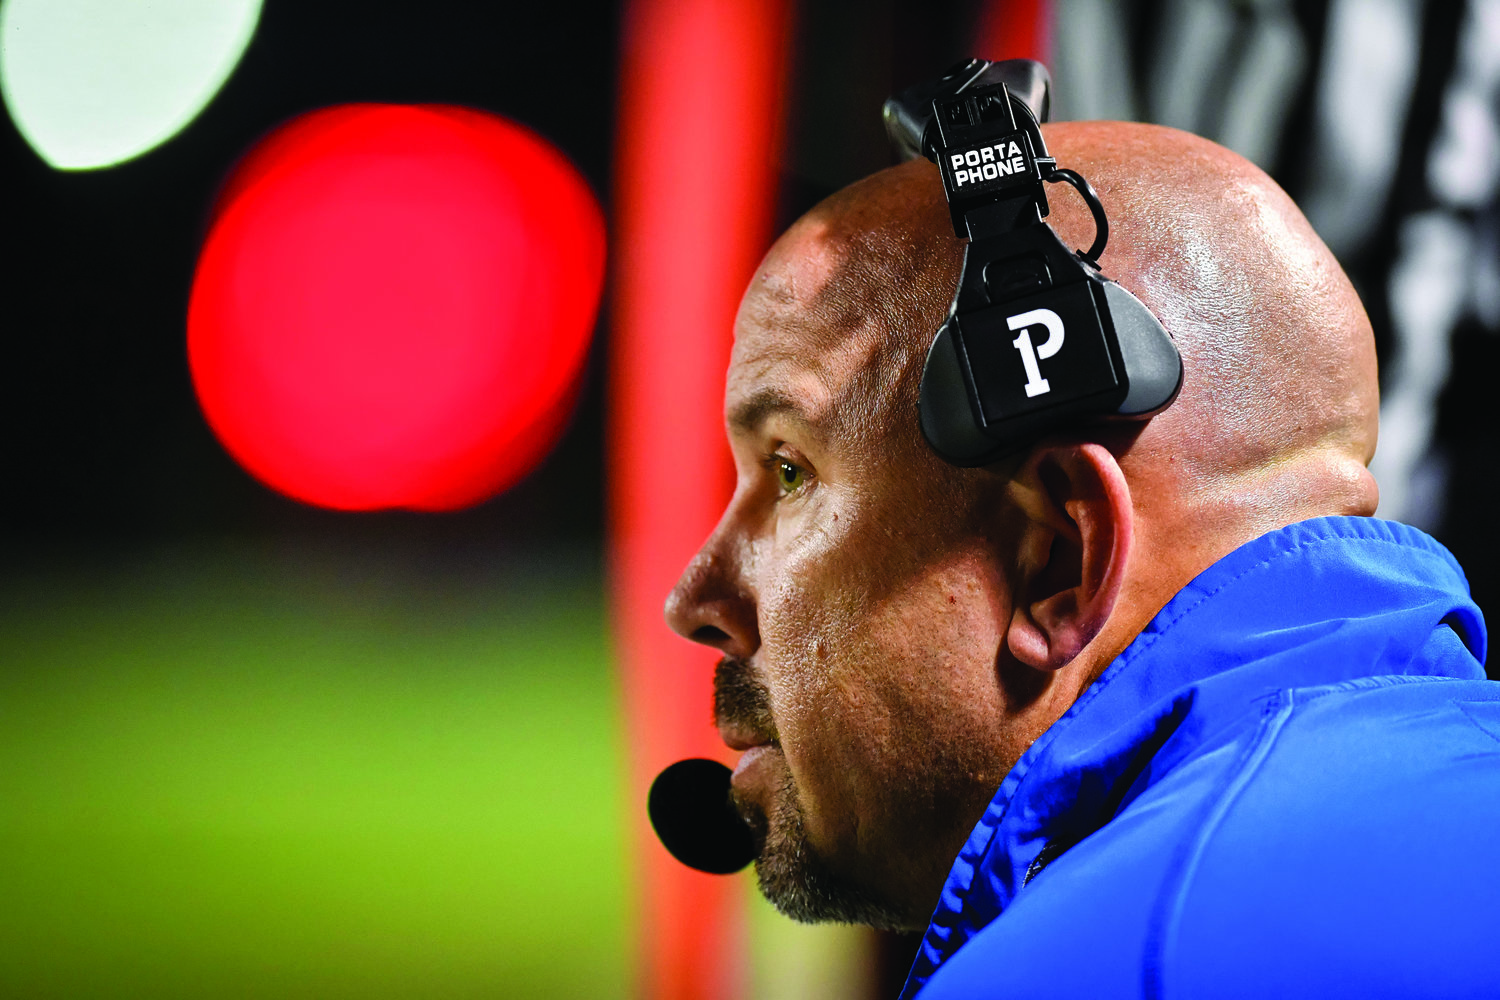 Quakertown head coach George Banas looks on during early first quarter action of the Panthers’ District One playoff game.